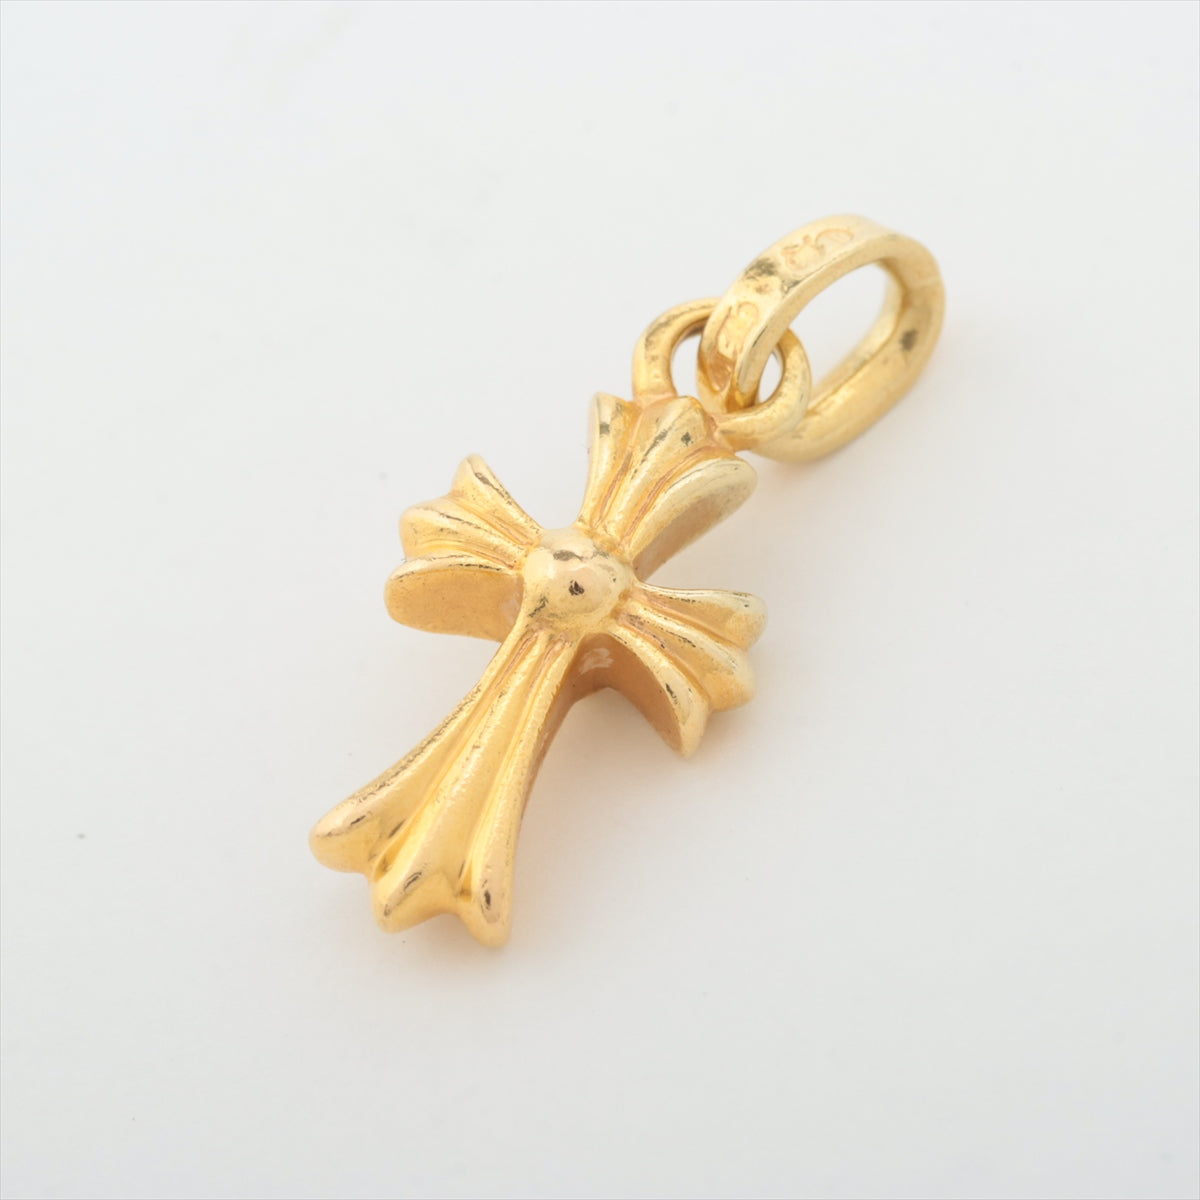 Chrome Hearts CH Cross Baby fat charms Pendant top 22k 3.6g